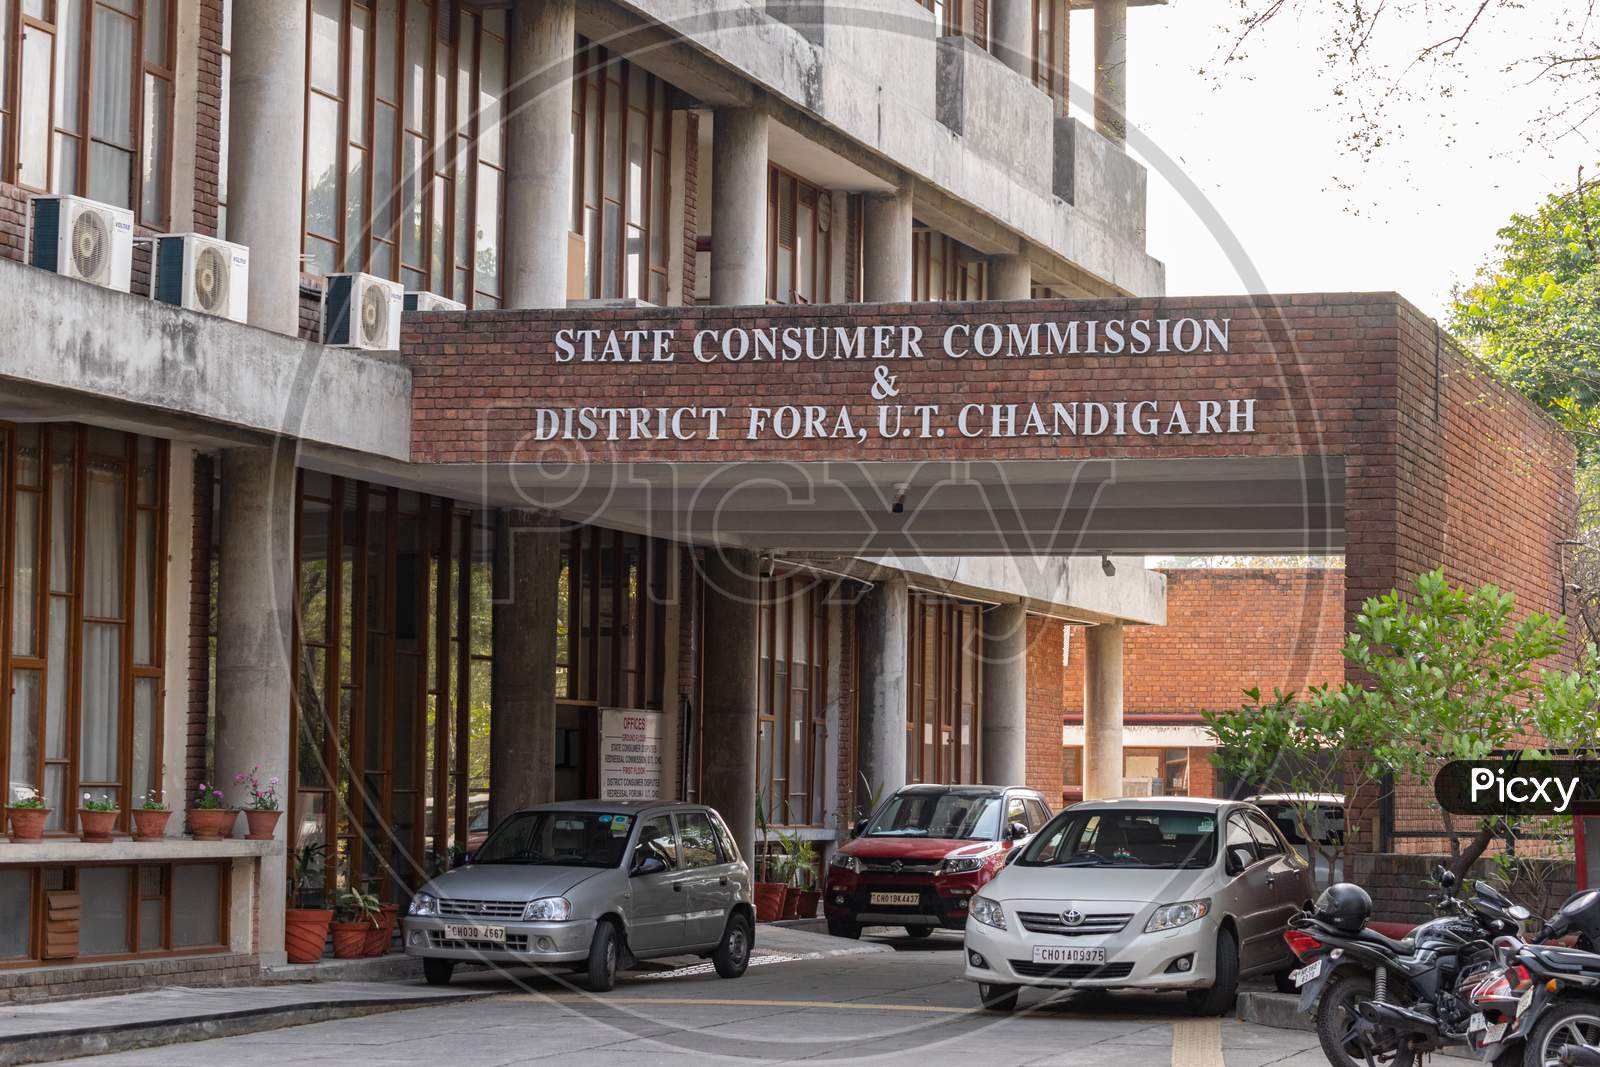 state consumer commission and district fora U.T chandigarh